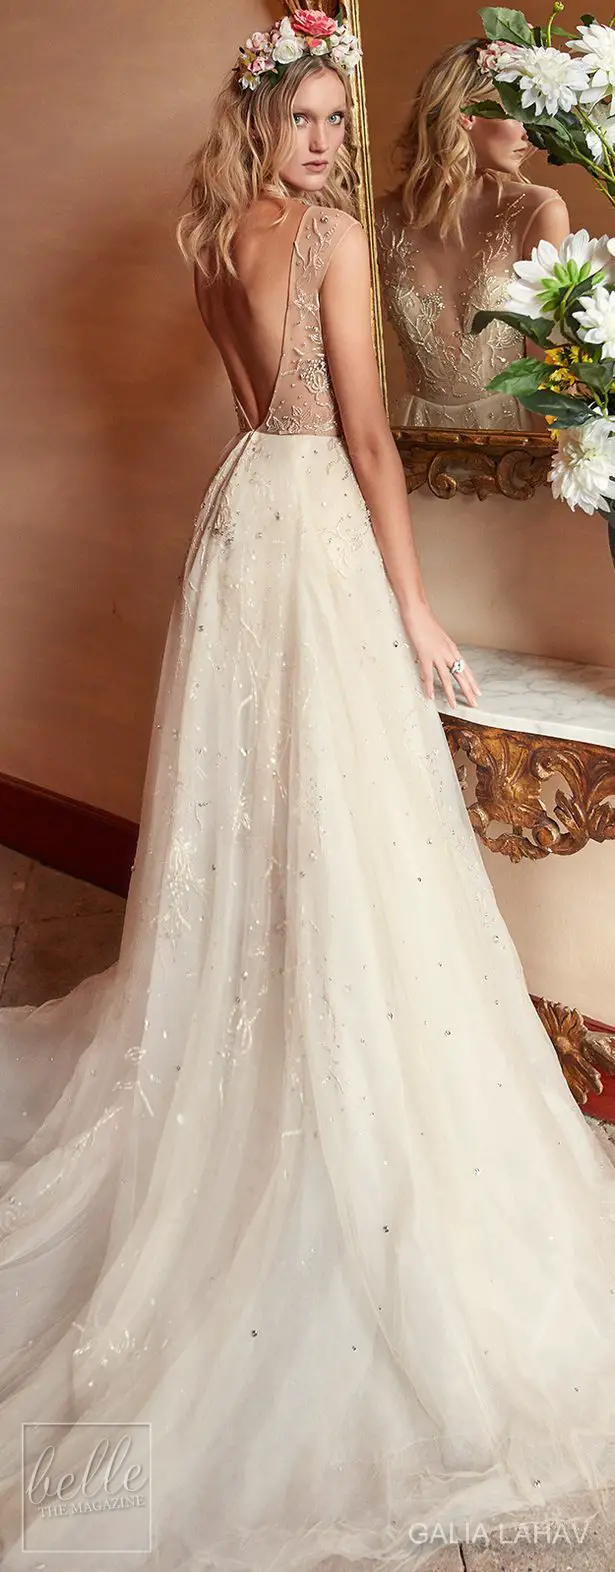 Wedding dress by Galia Lahav Couture Bridal - Fall 2018 - Florence by Night - Rose Water